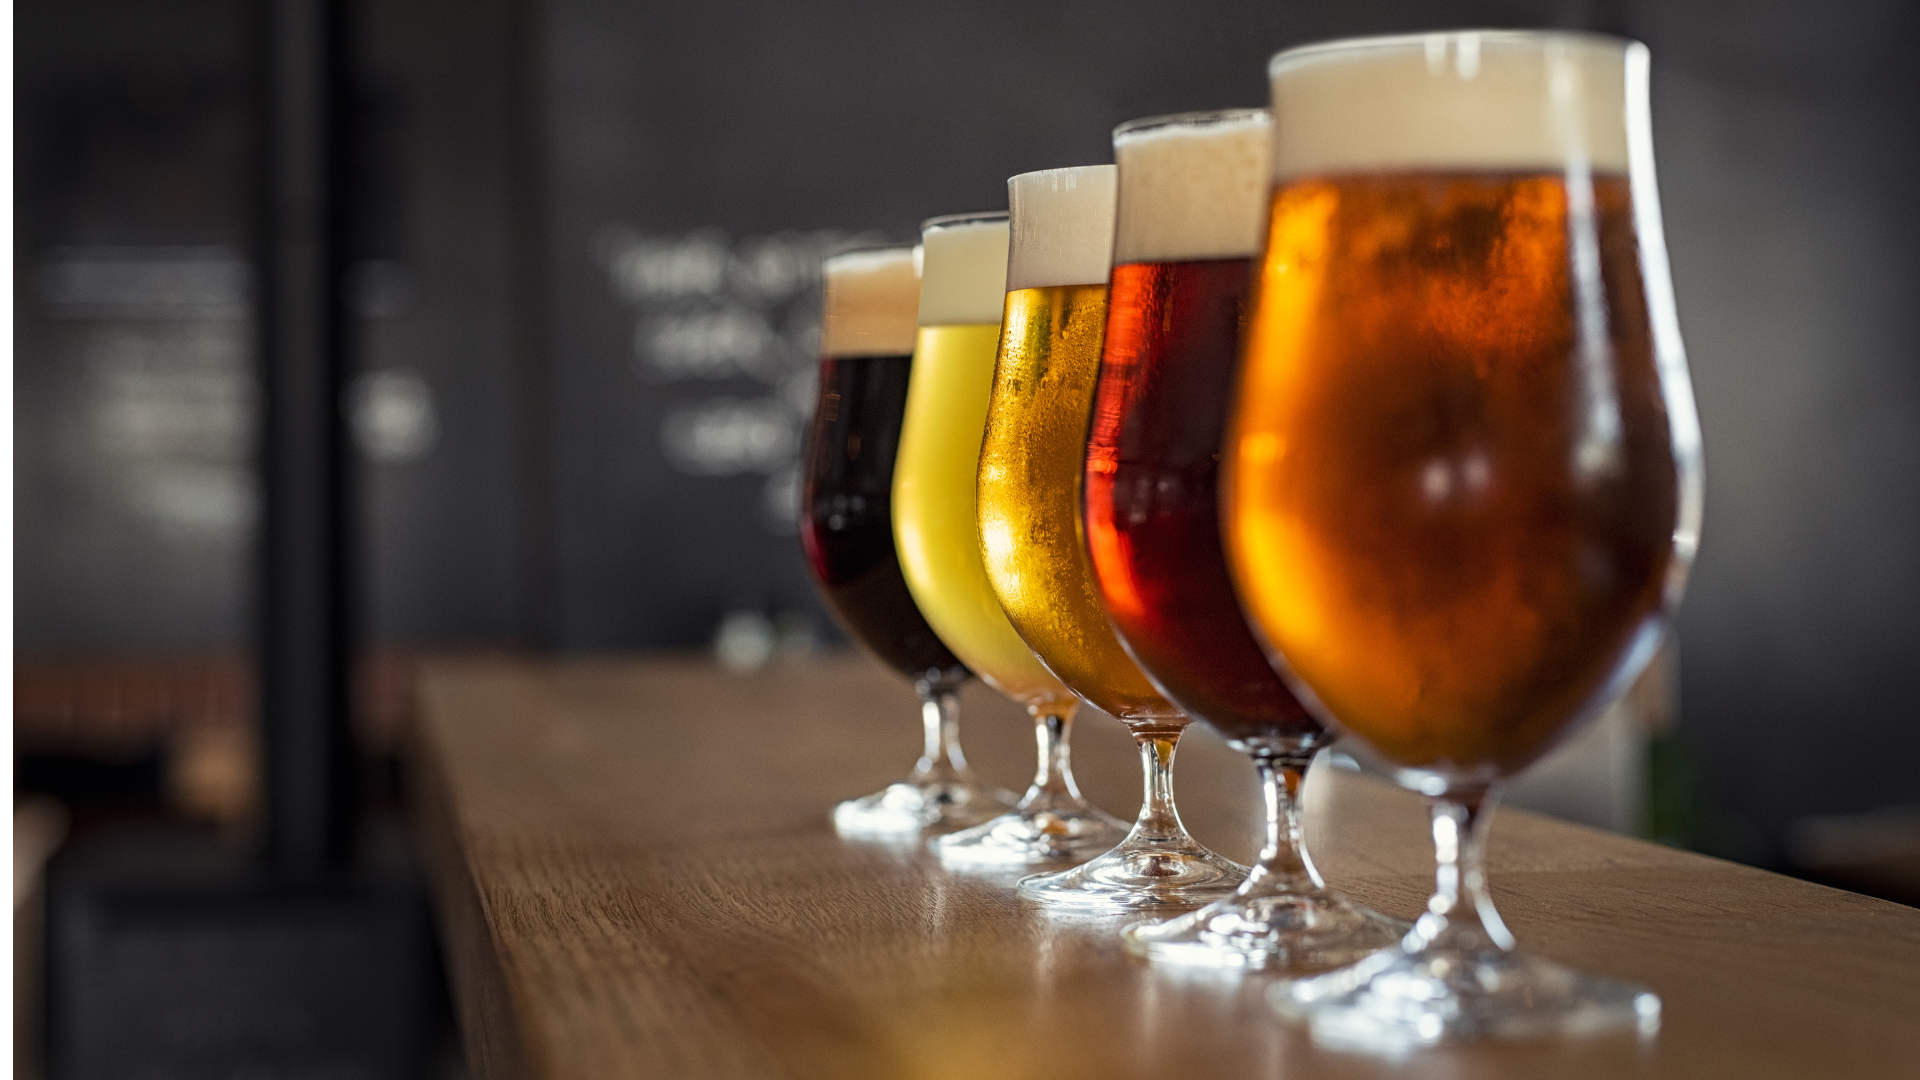 sustainable beer is top concern of customers and brewers